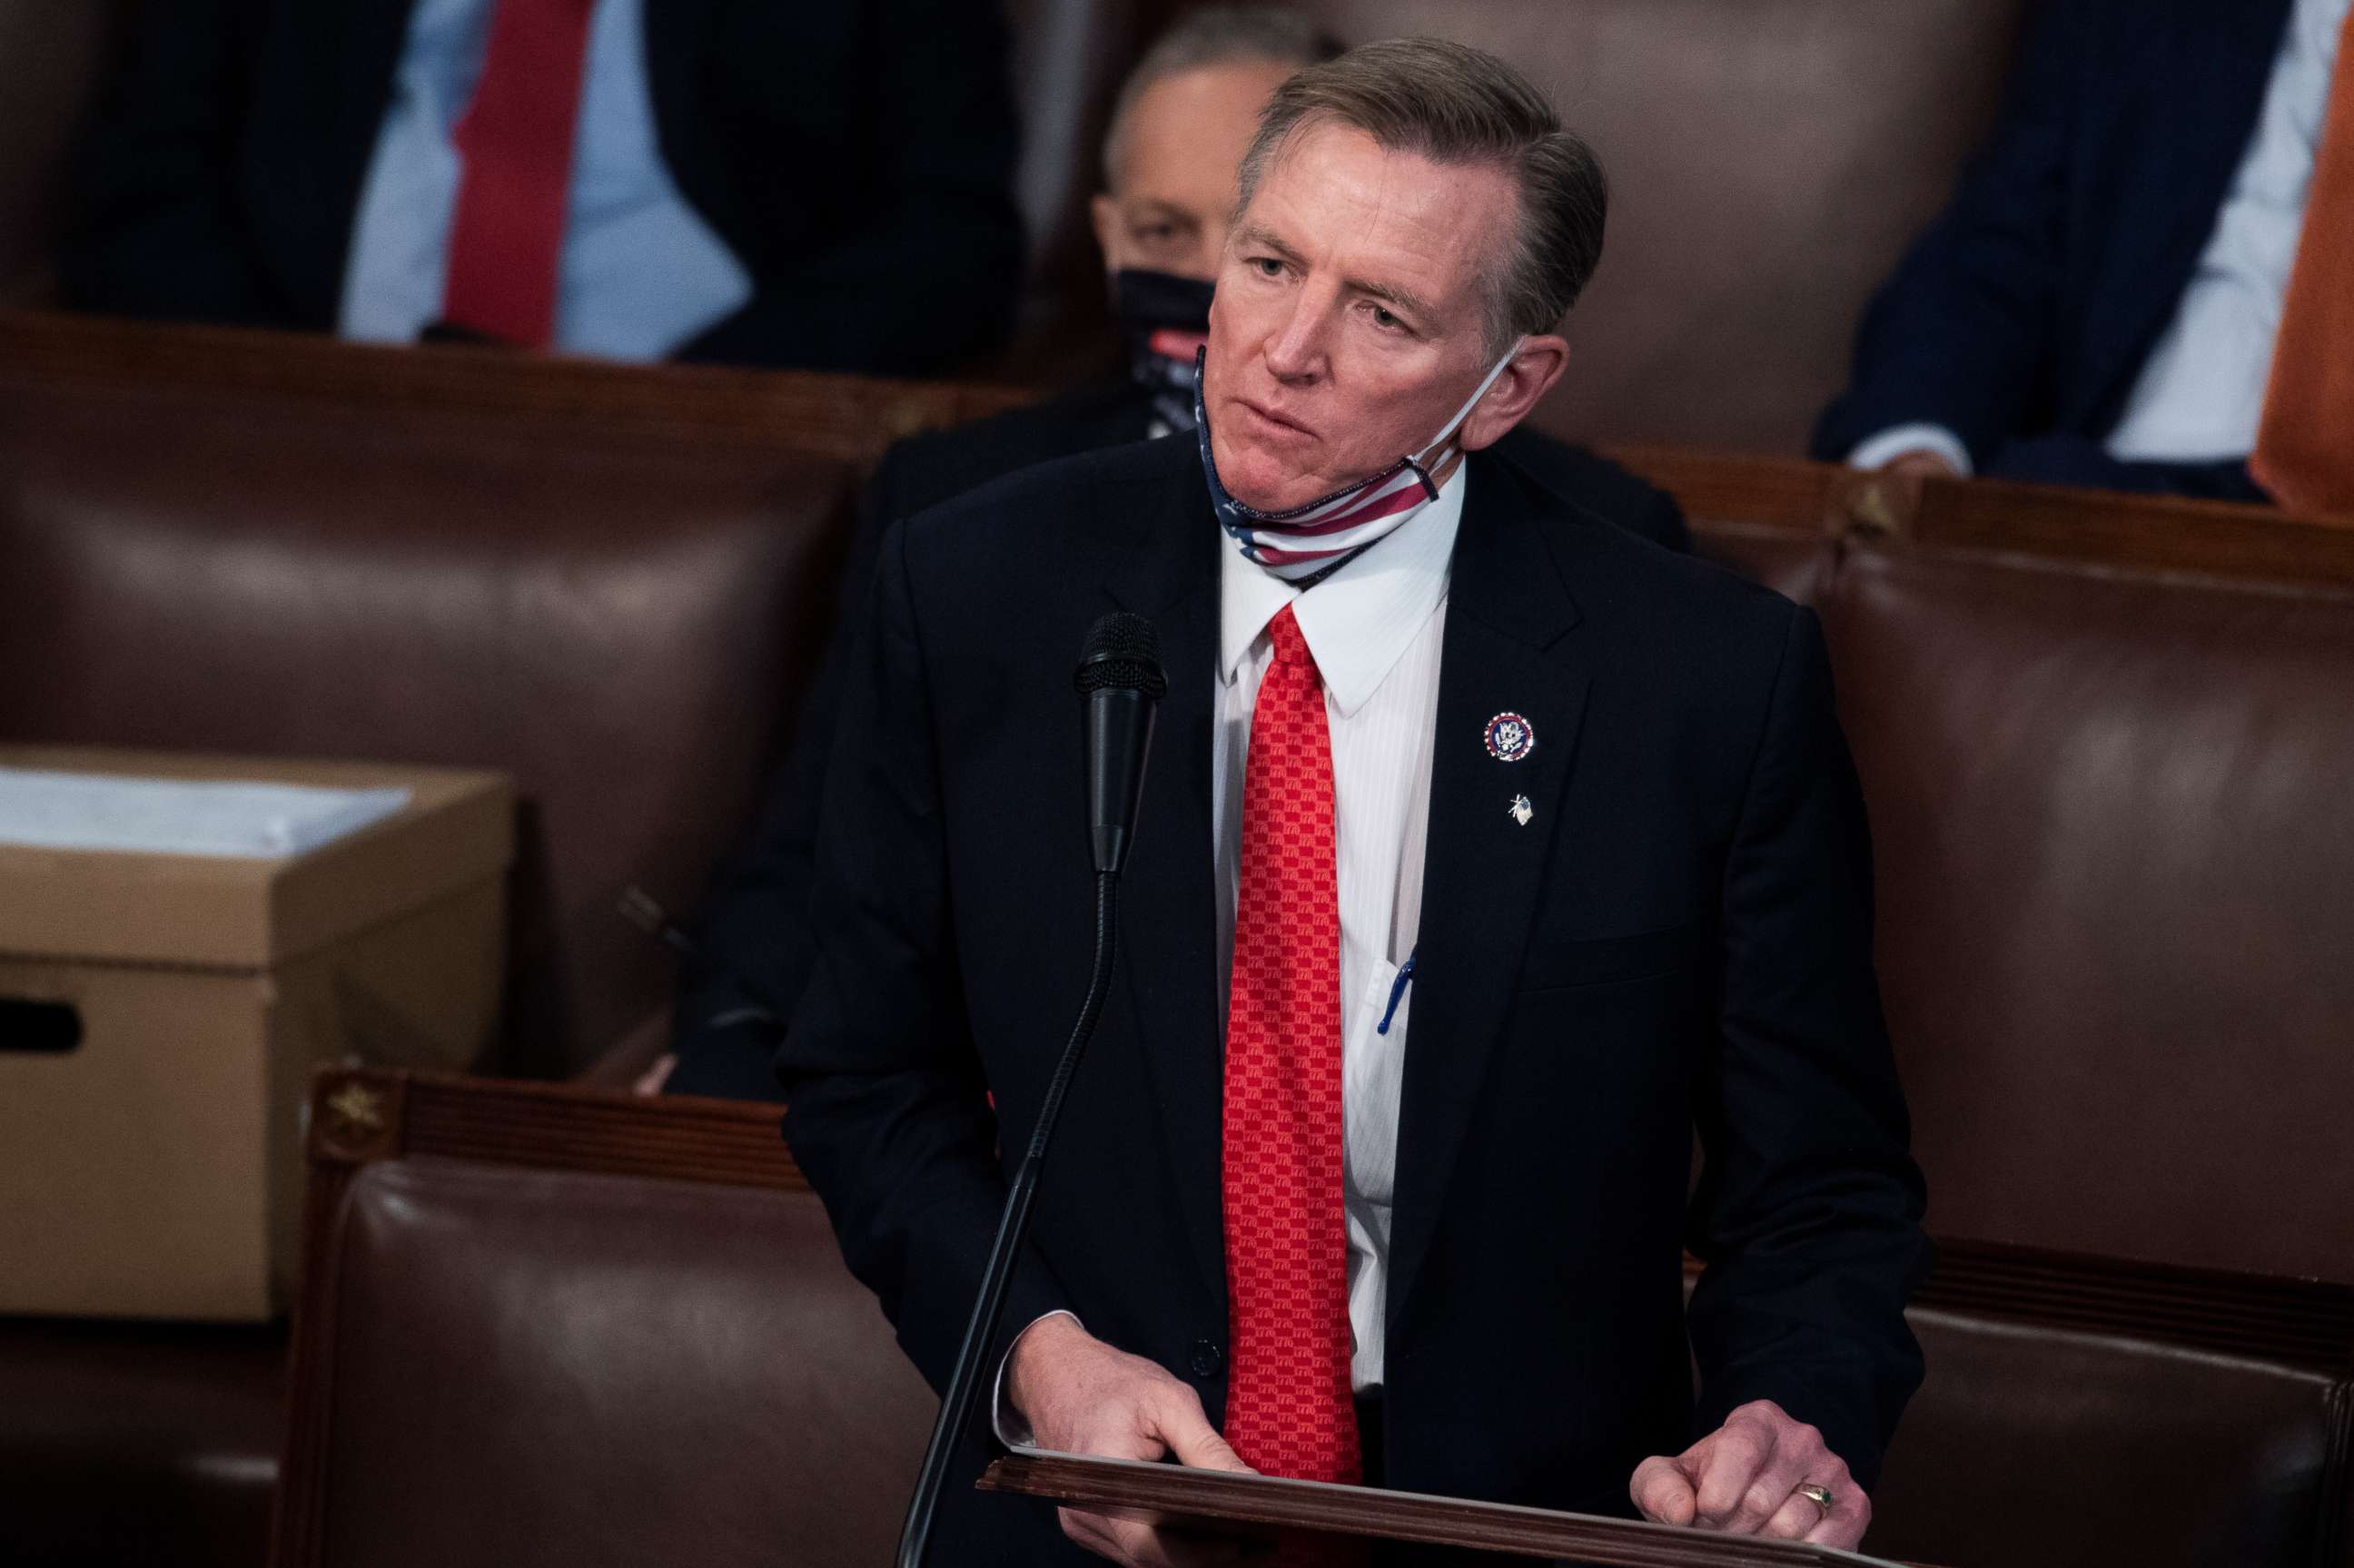 PHOTO: Rep. Paul Gosar objects to Arizona's electoral college vote certification for Joe Biden during a joint session of Congress in the House chamber of the U.S. Capitol in Washington, Jan. 6, 2021.